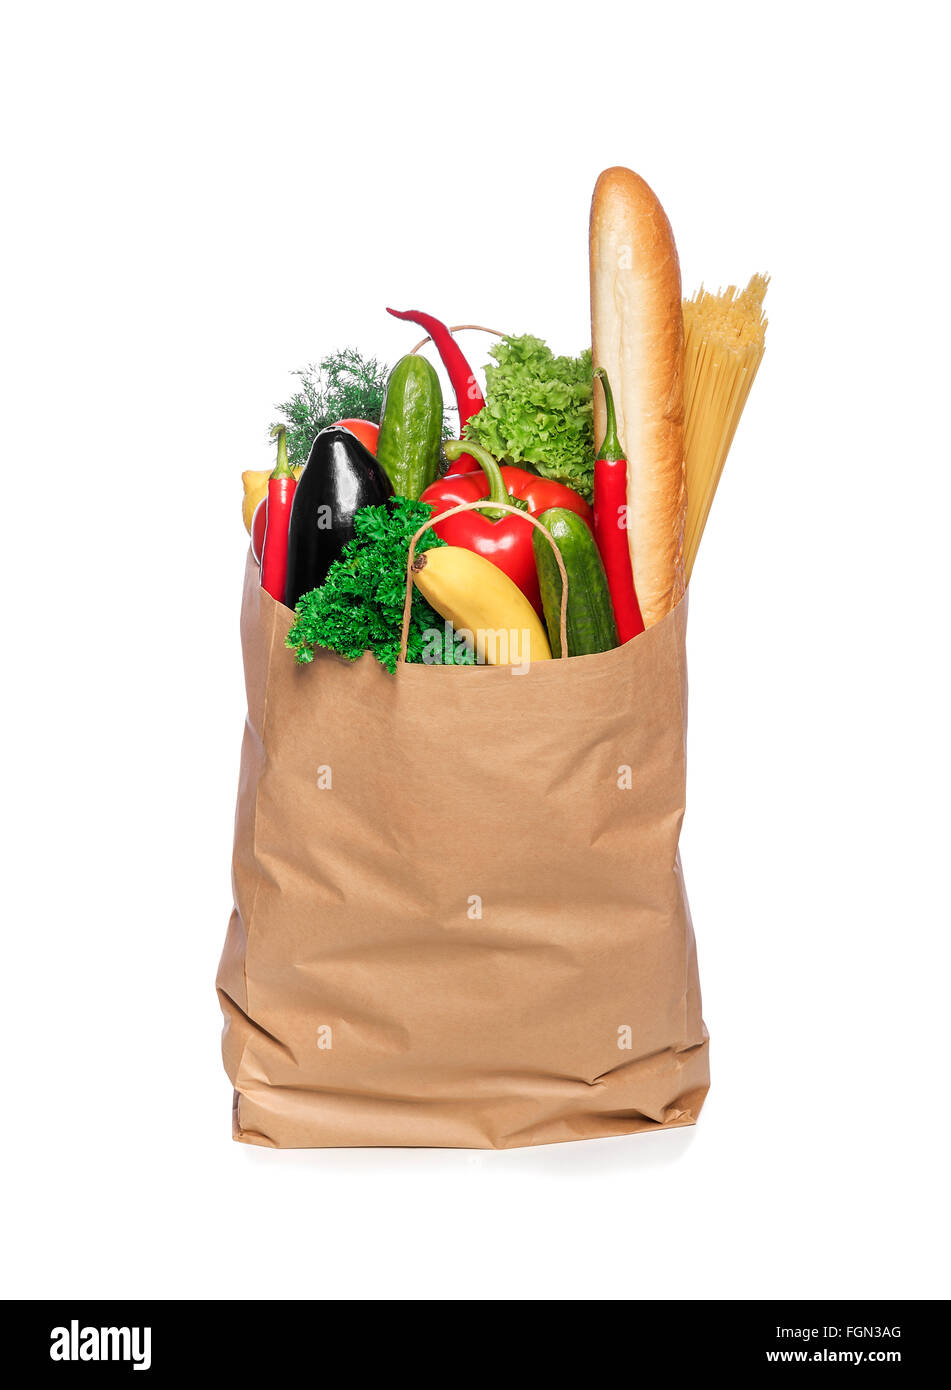 Paper bag with vegetables isolated on white background. Stock Photo